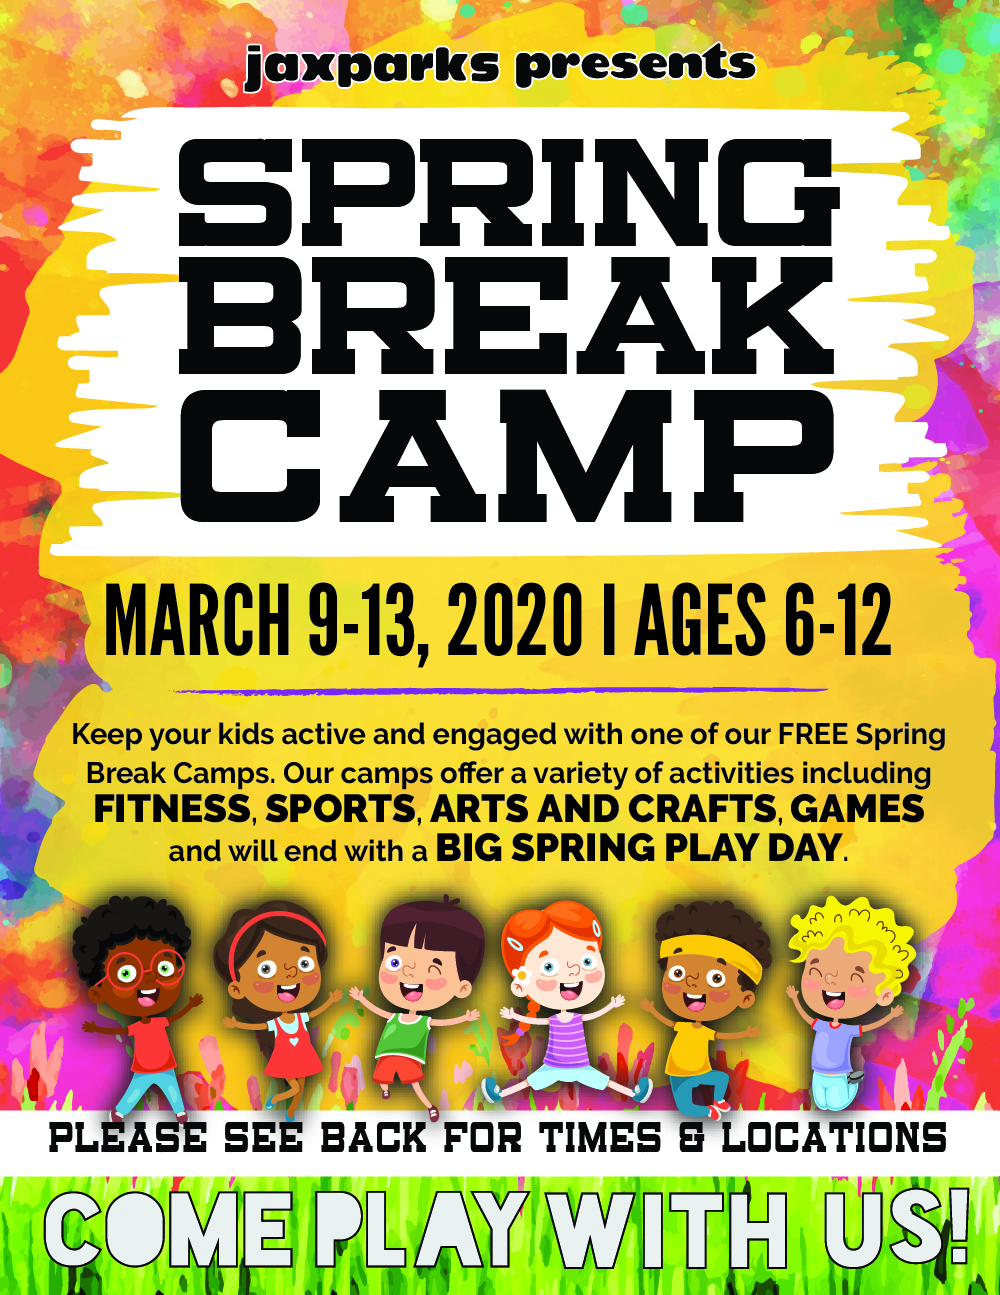 2020 Spring Break Camp and locations